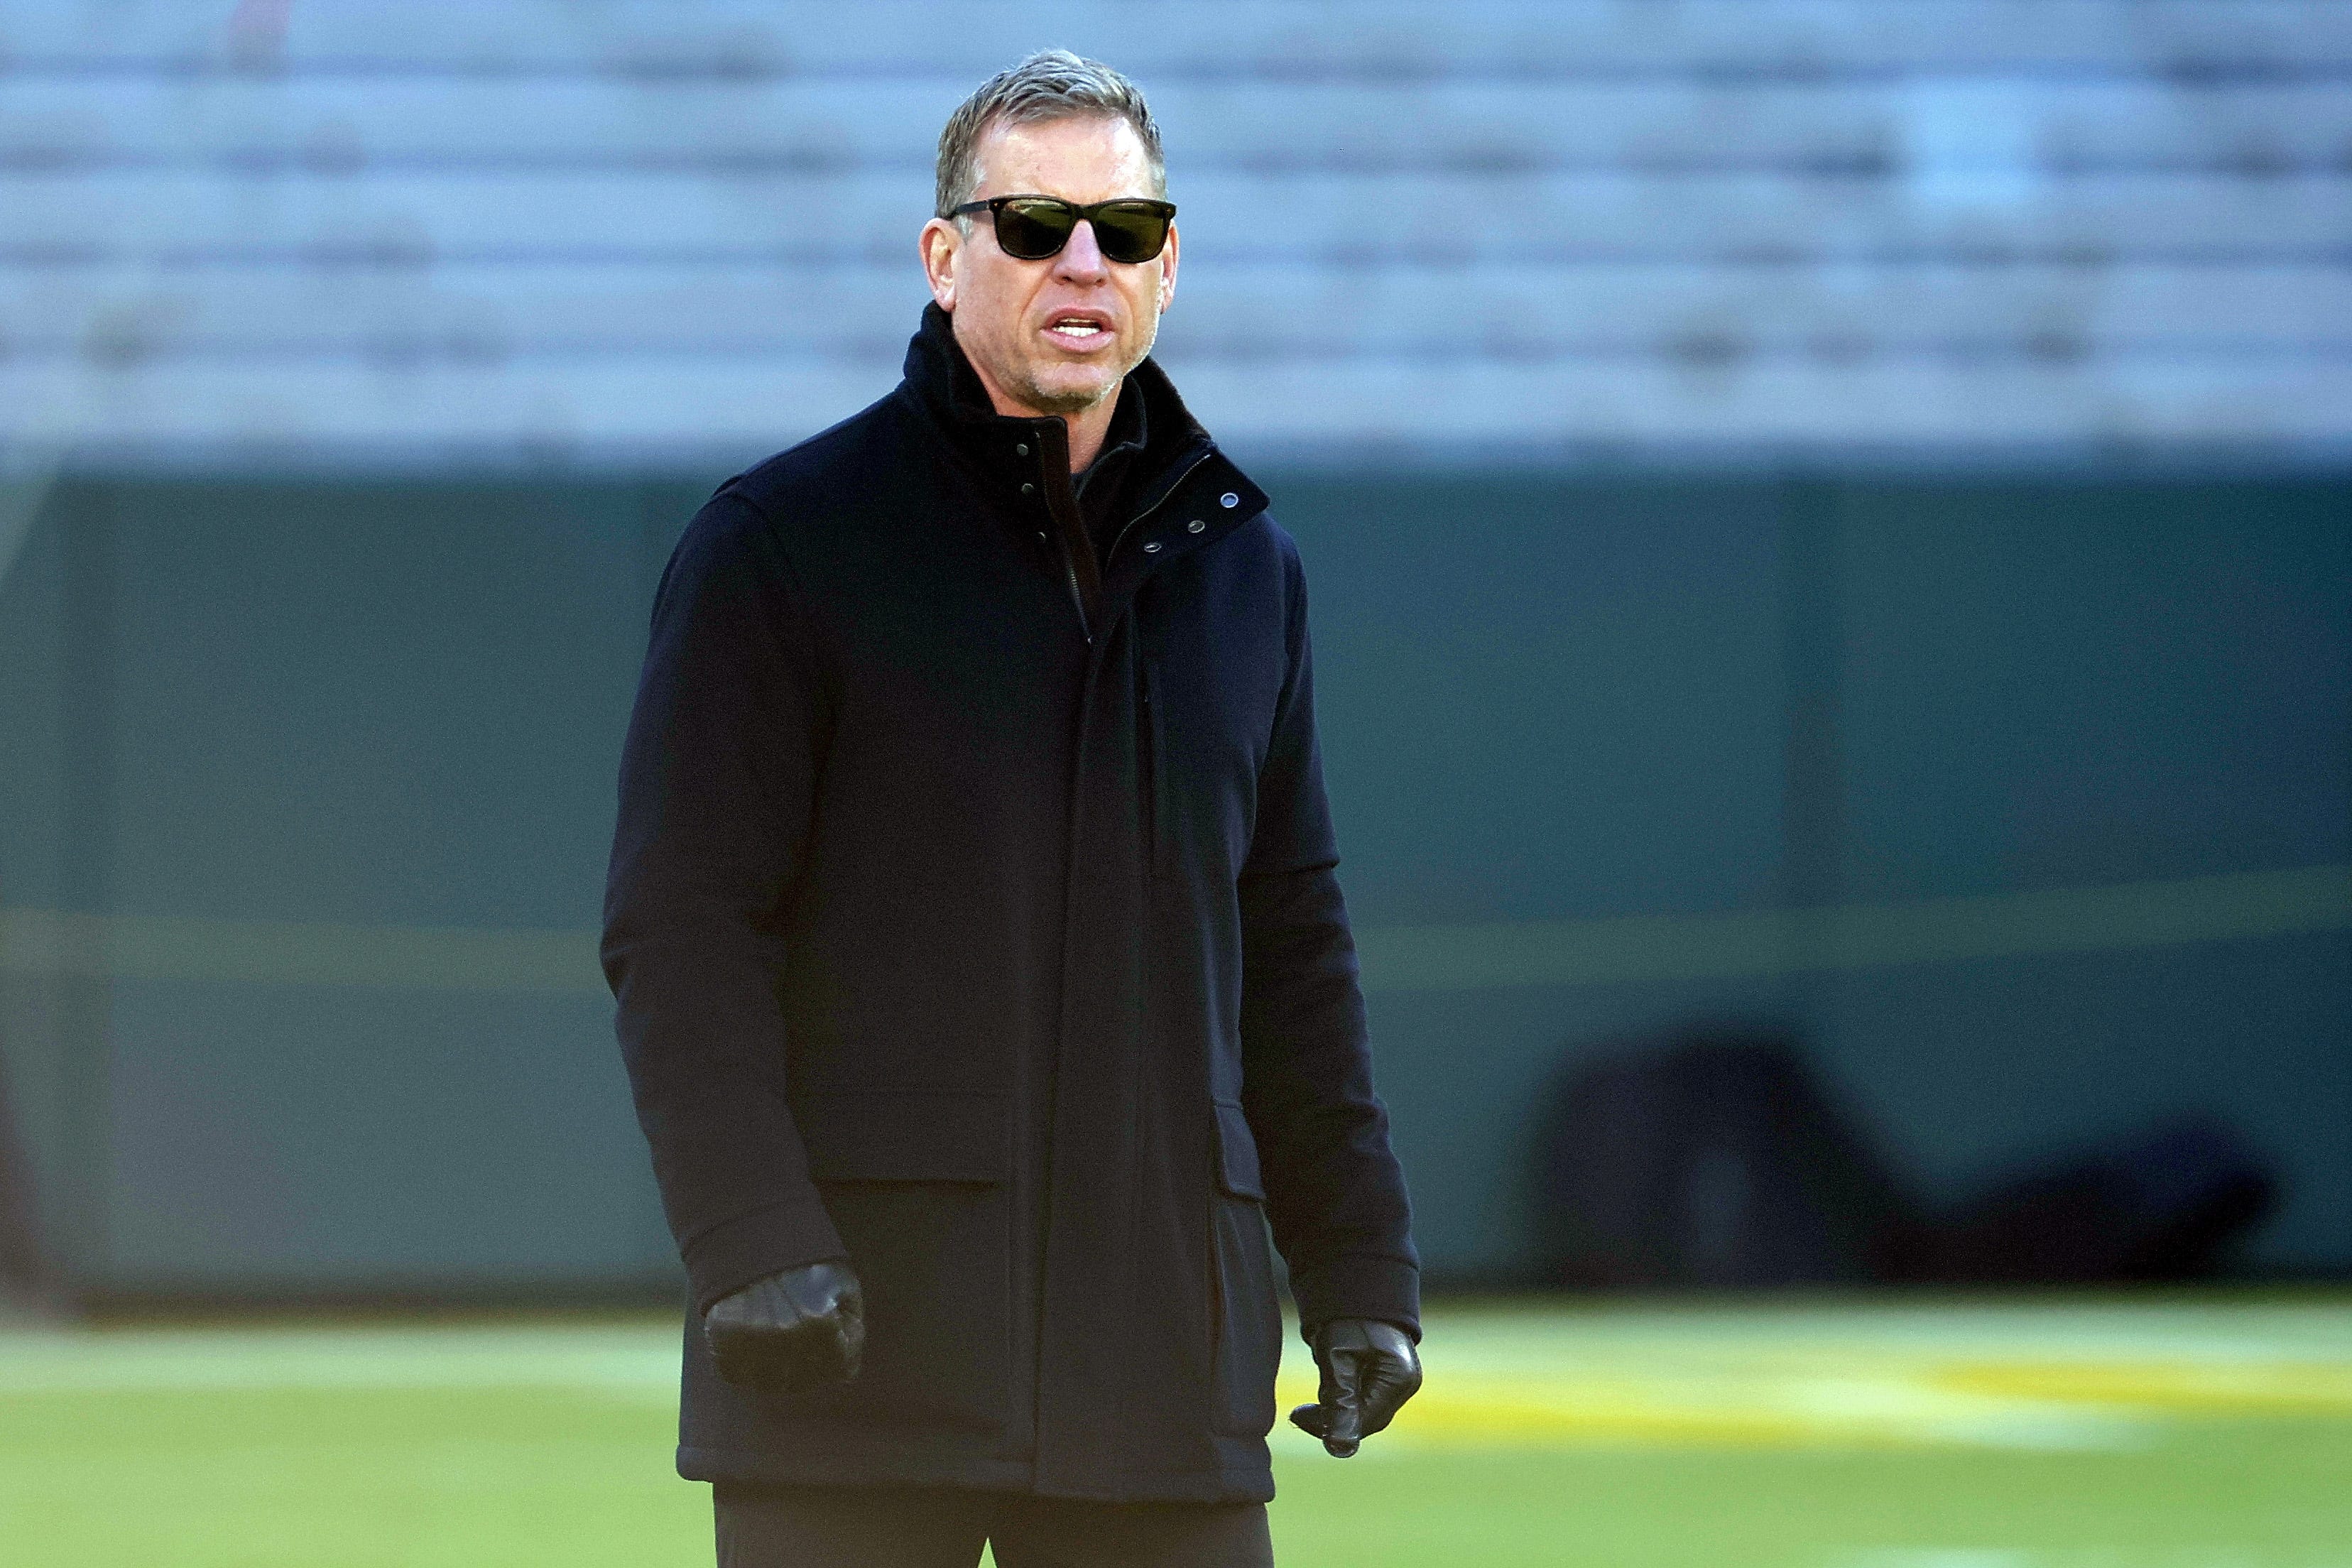 Troy Aikman rips Cowboys game plan, compares team to Jaguars, Jets after Wild Card loss to 49ers